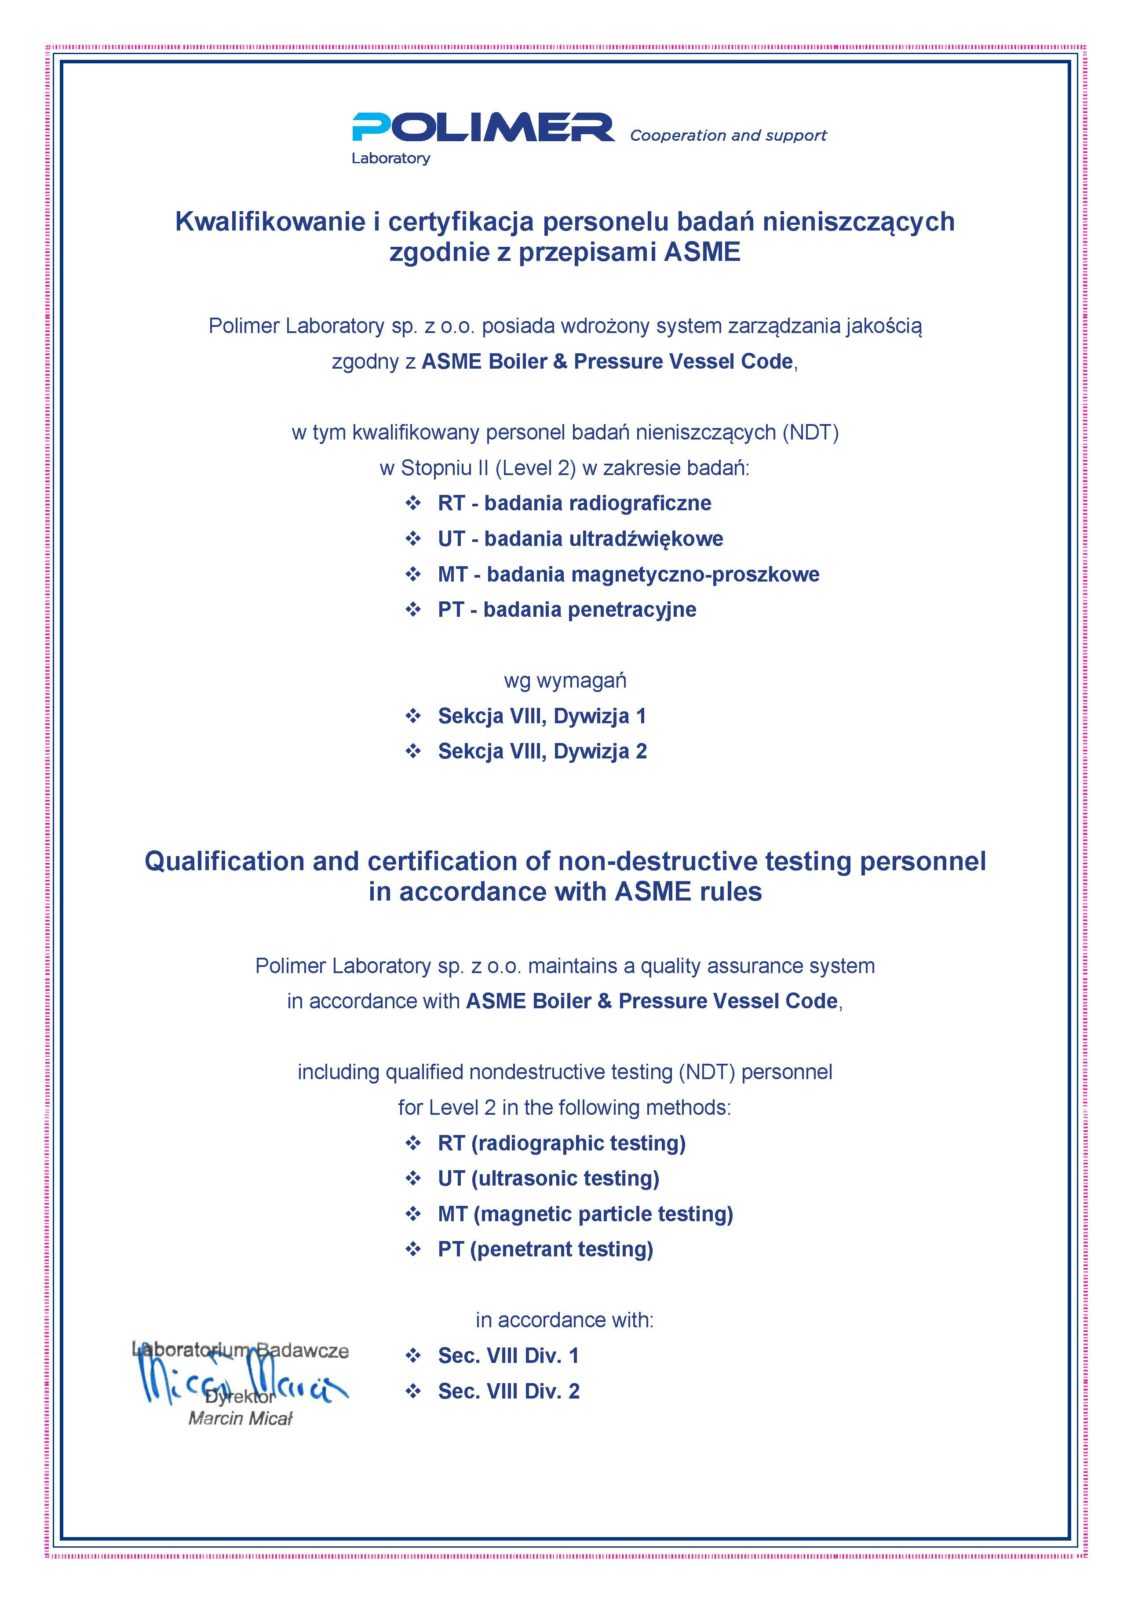 Certificates and authorisations